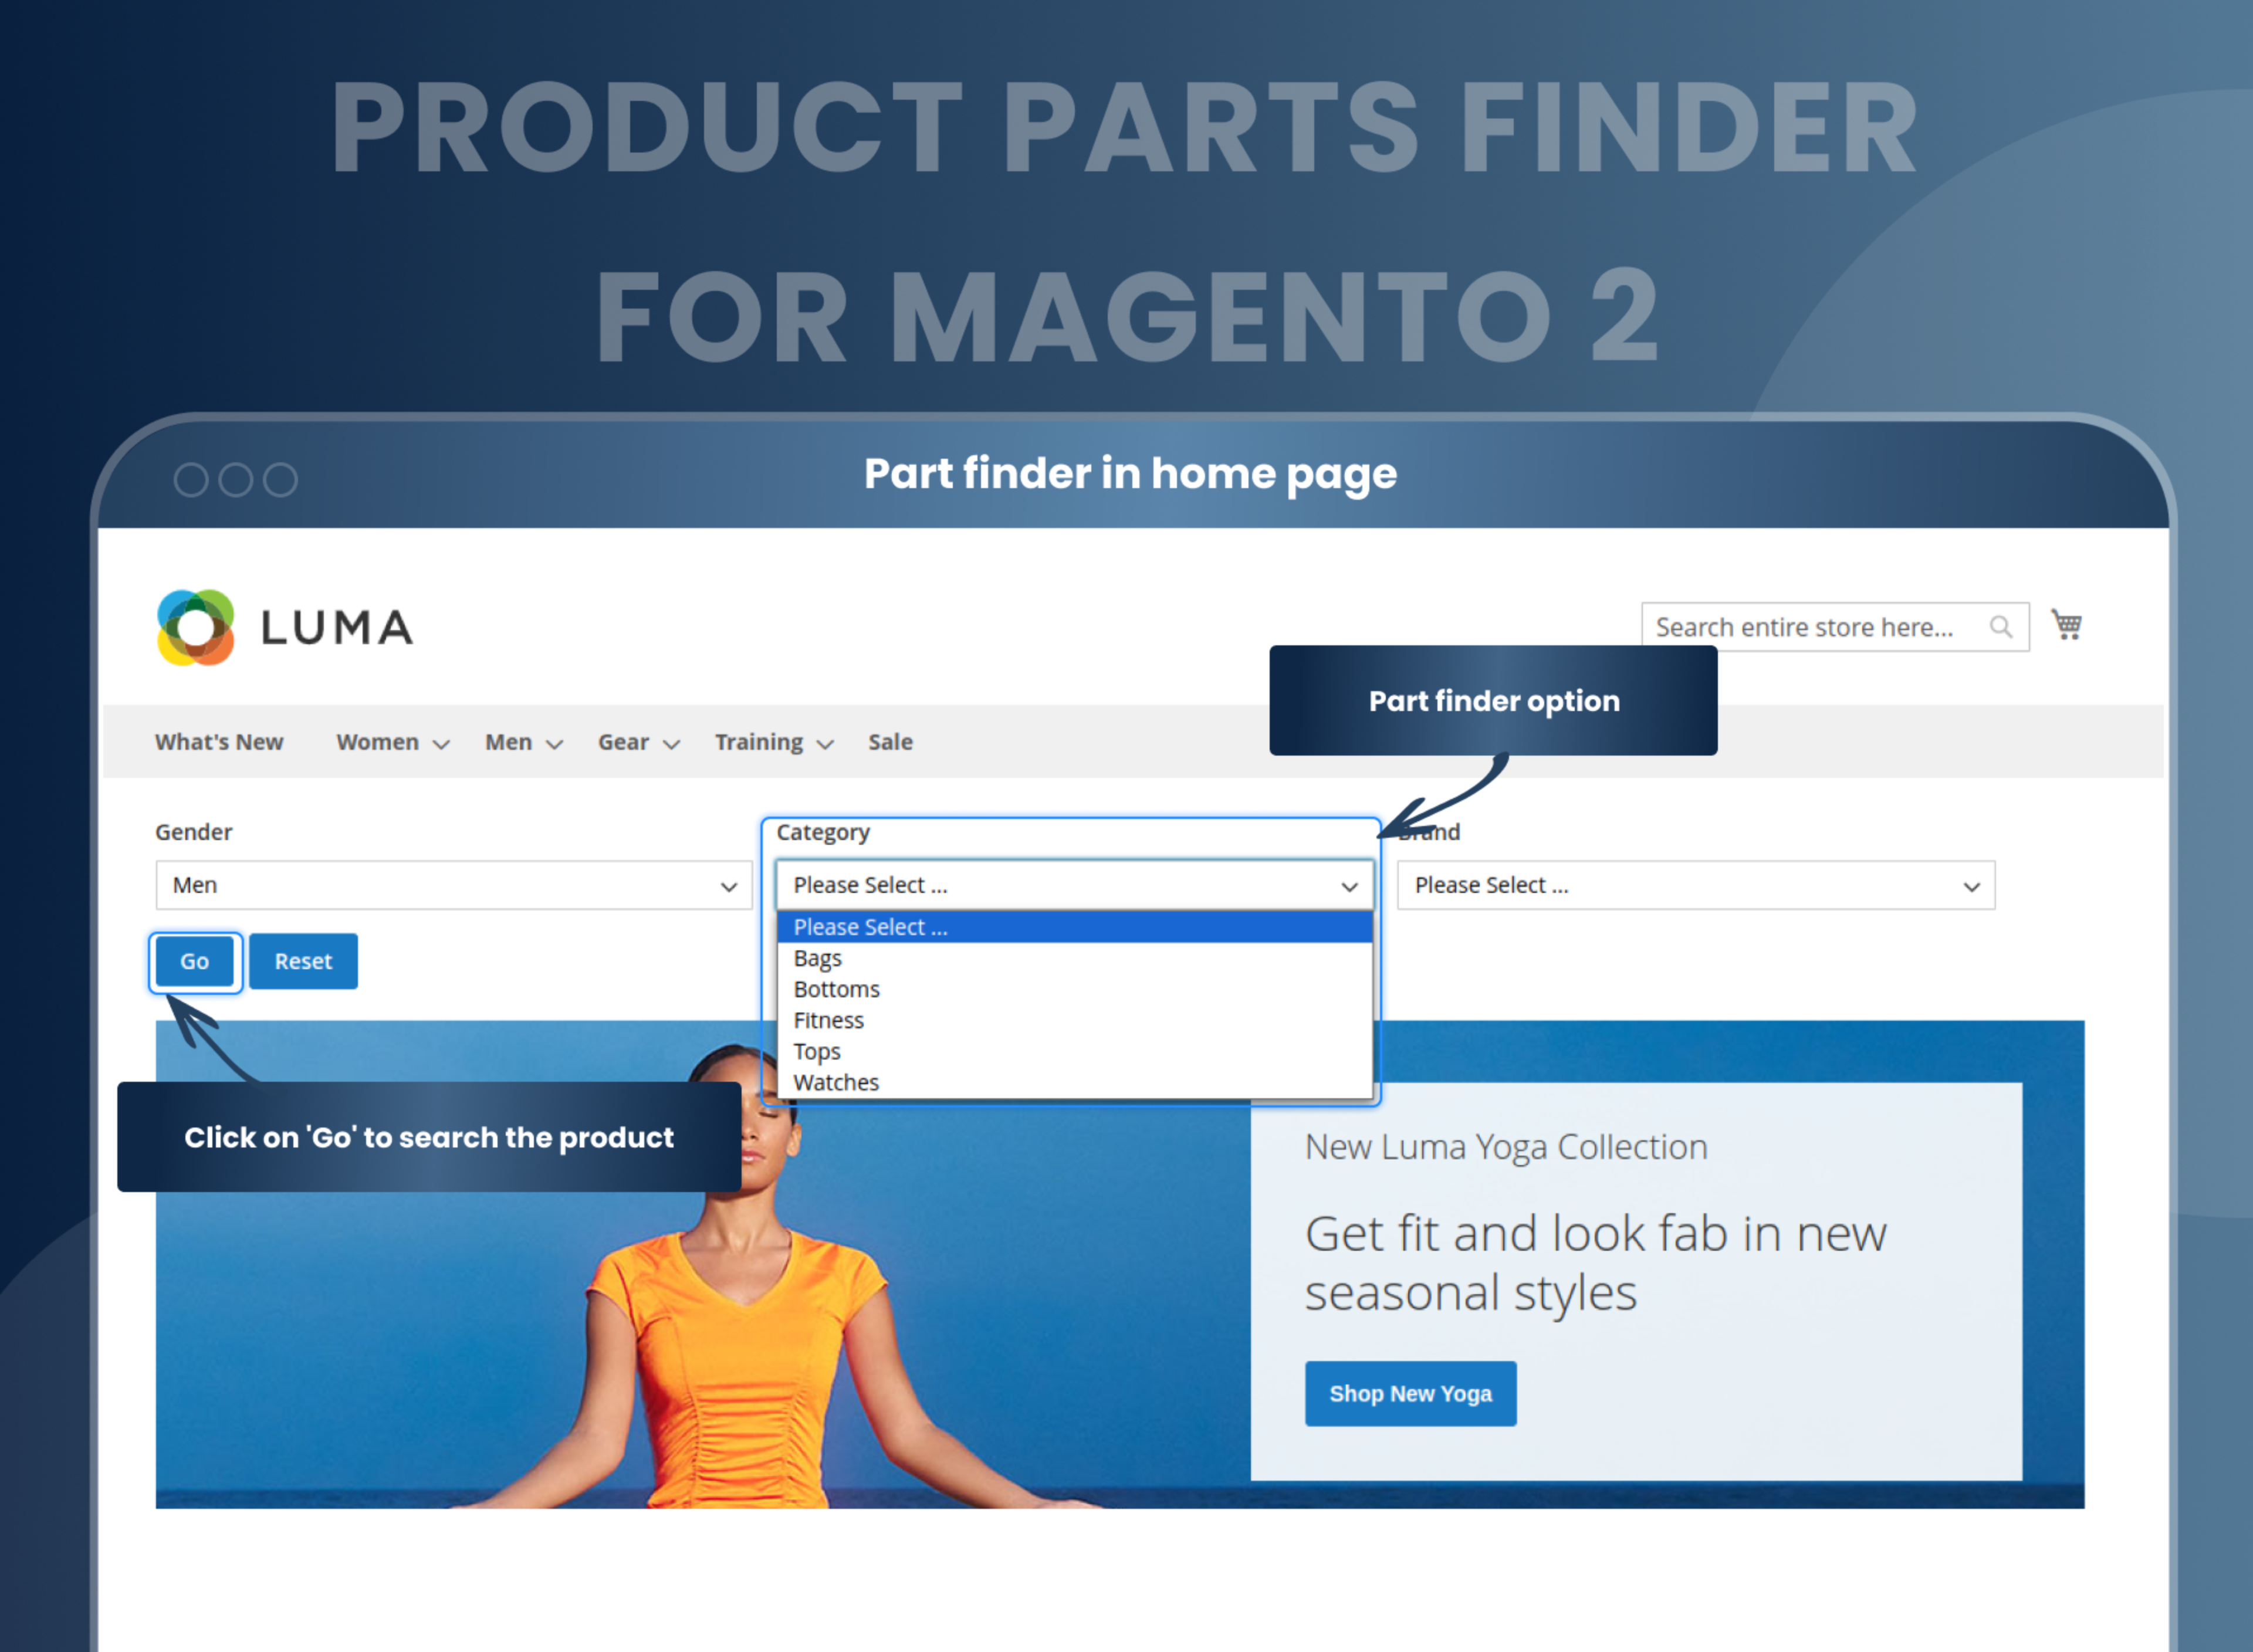 Part finder in home page